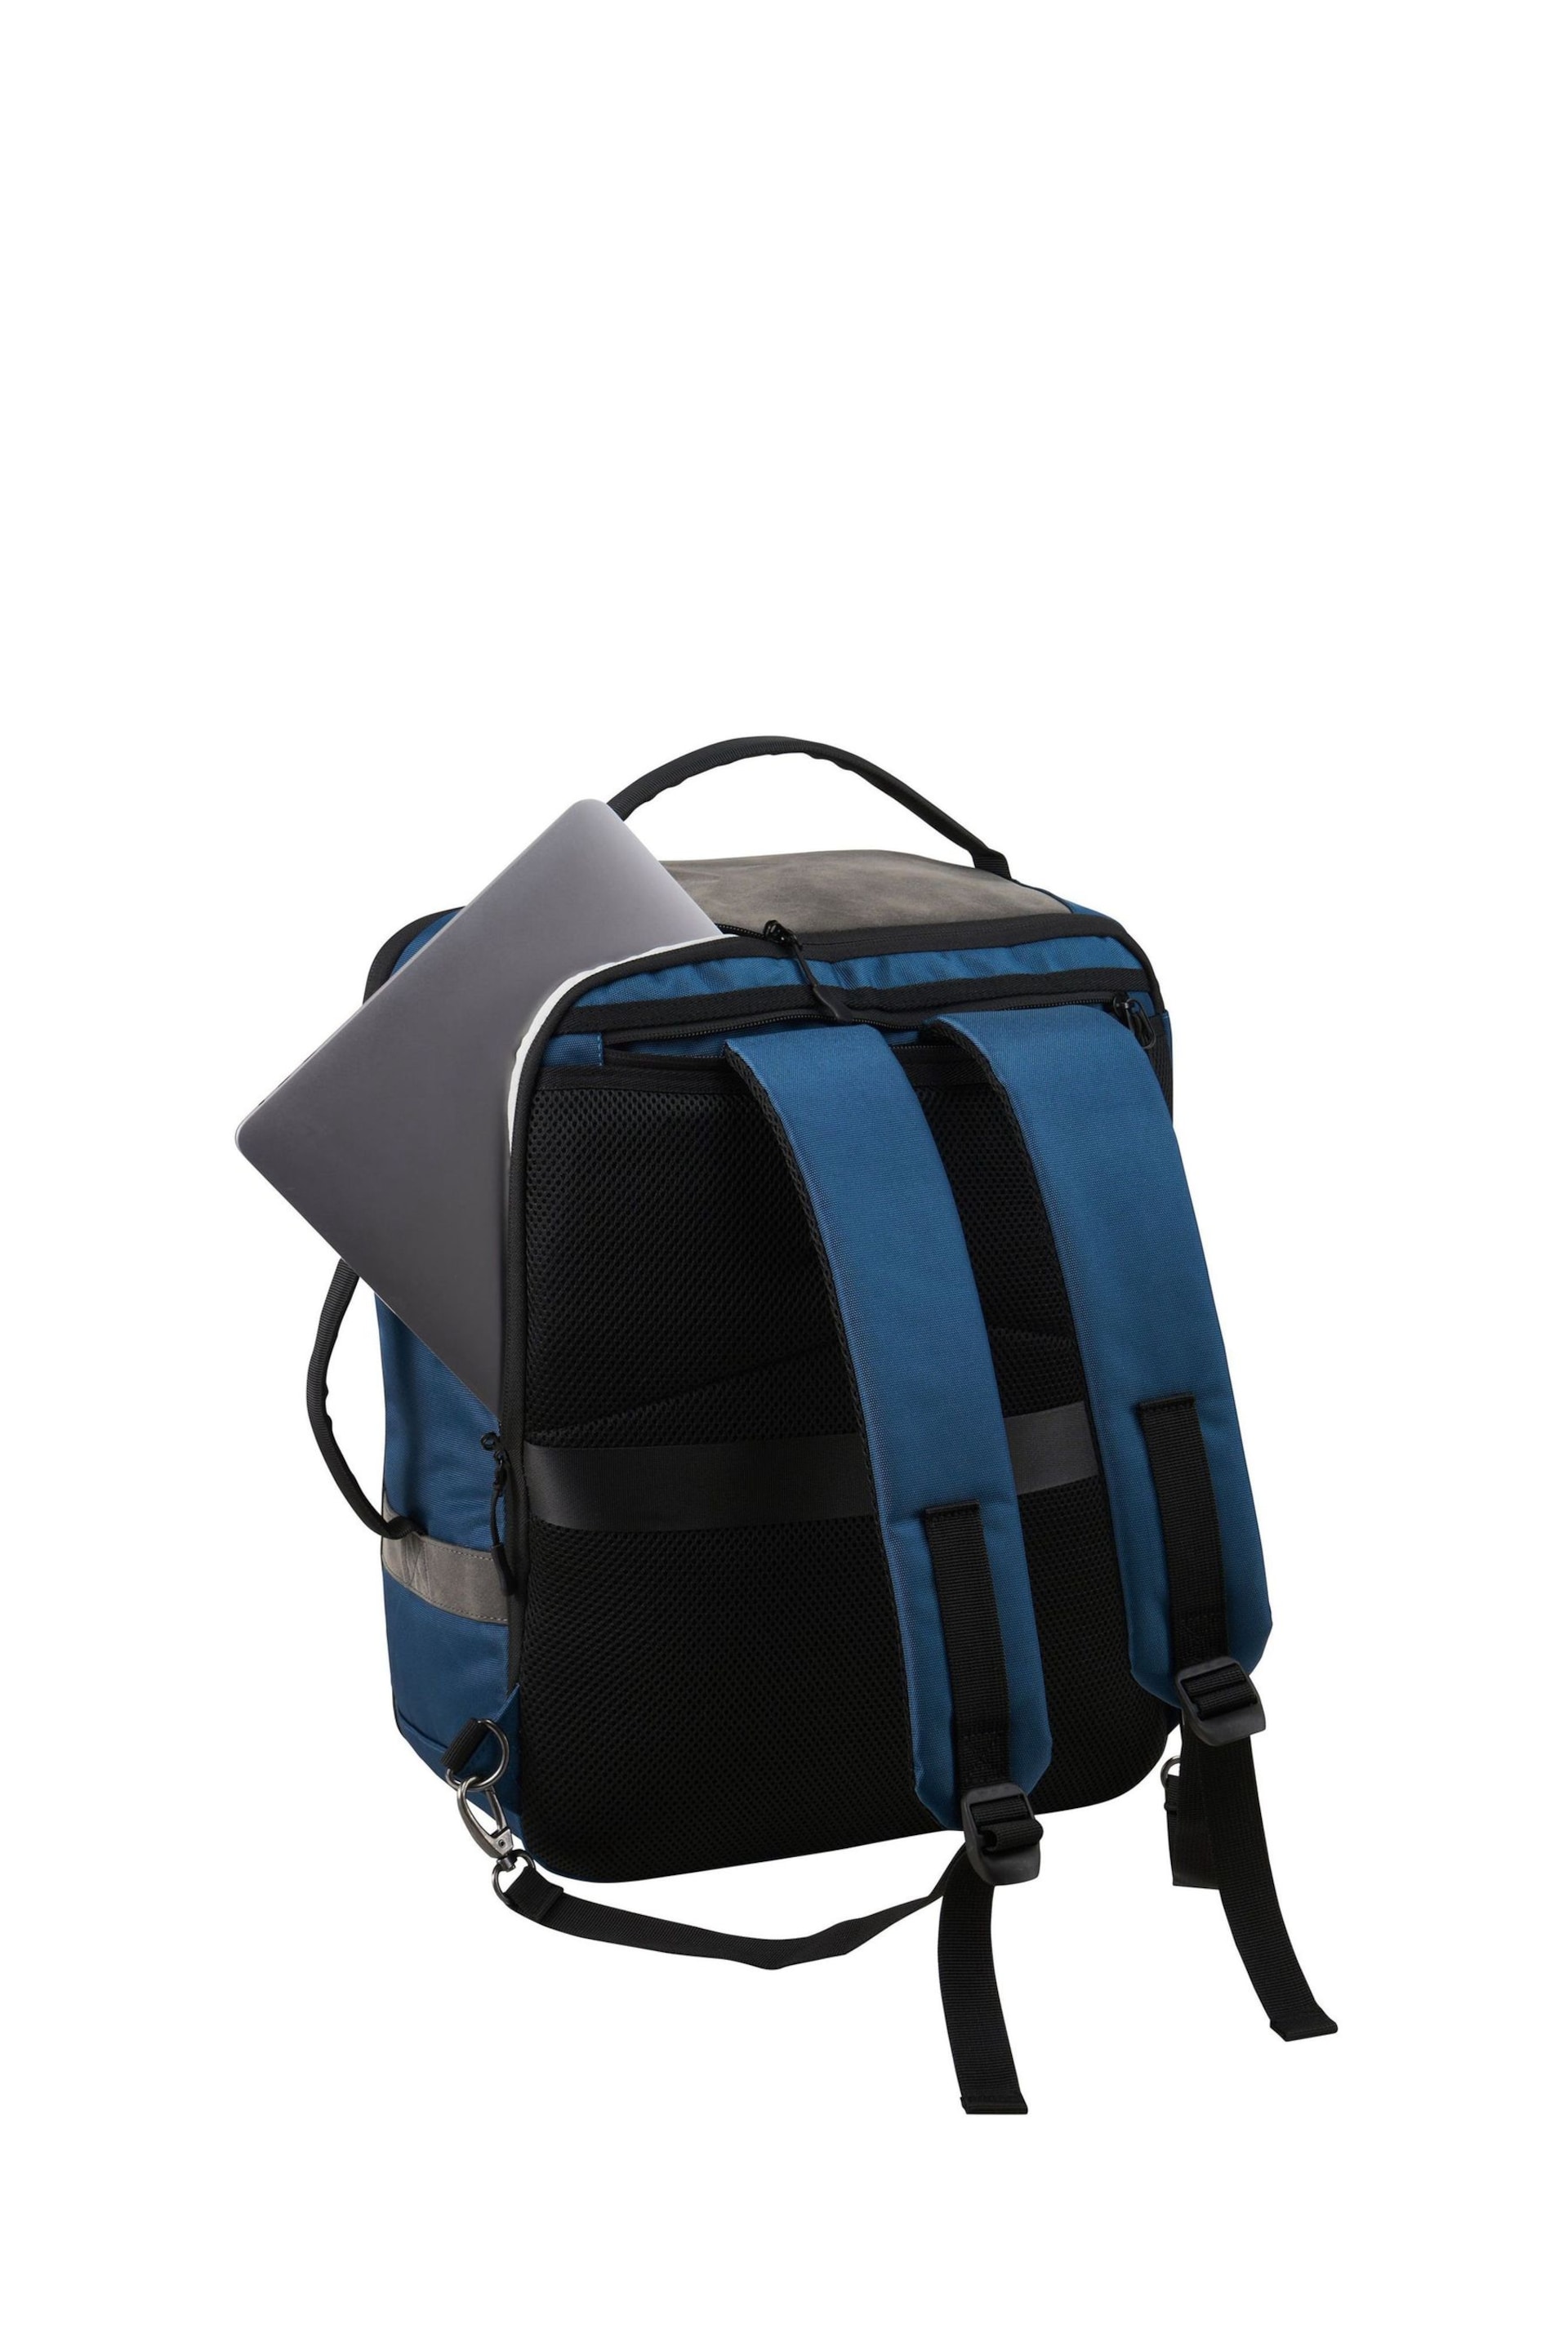 Cabin Max Underseat Backpack 30 Litre 45cm Manhattan USB - Image 2 of 5